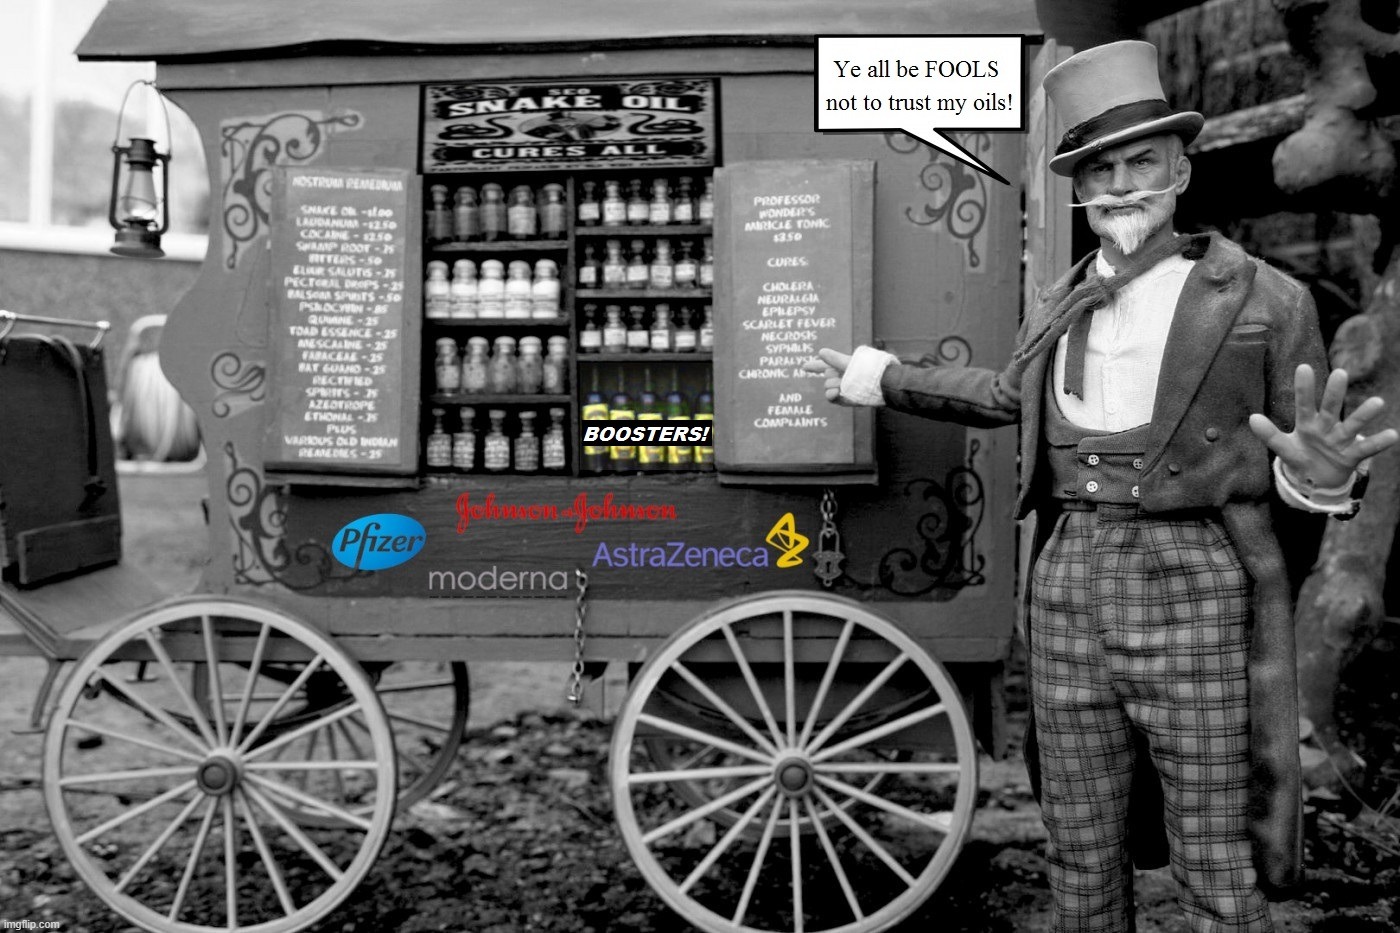 "we got boosters too!" | image tagged in vaccine,covid,snake oil,big pharma,fauci,drugs | made w/ Imgflip meme maker